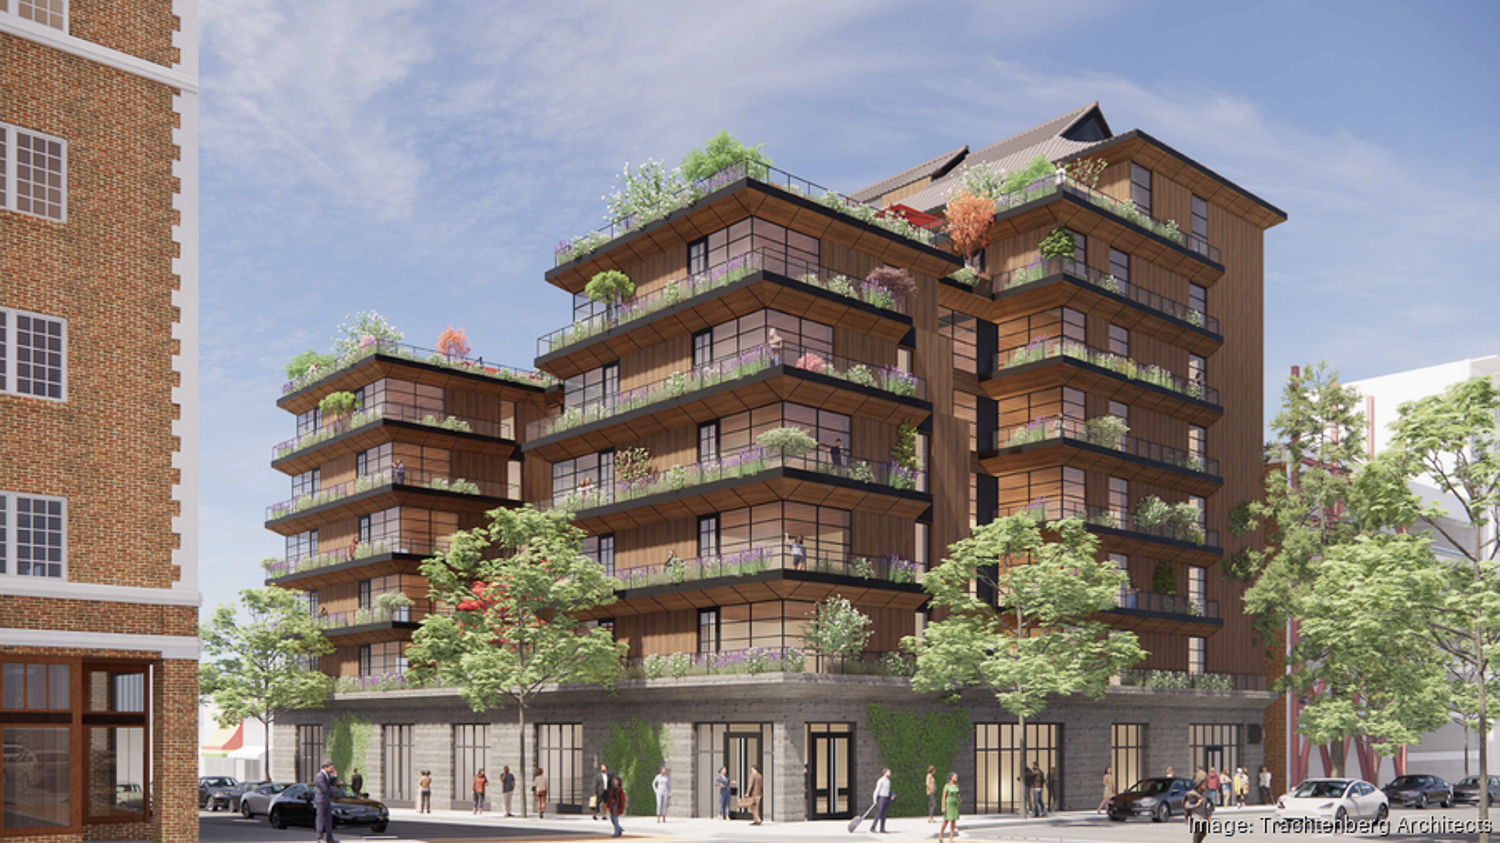 2350 Telegraph Avenue, rendering by Trachtenberg Architects